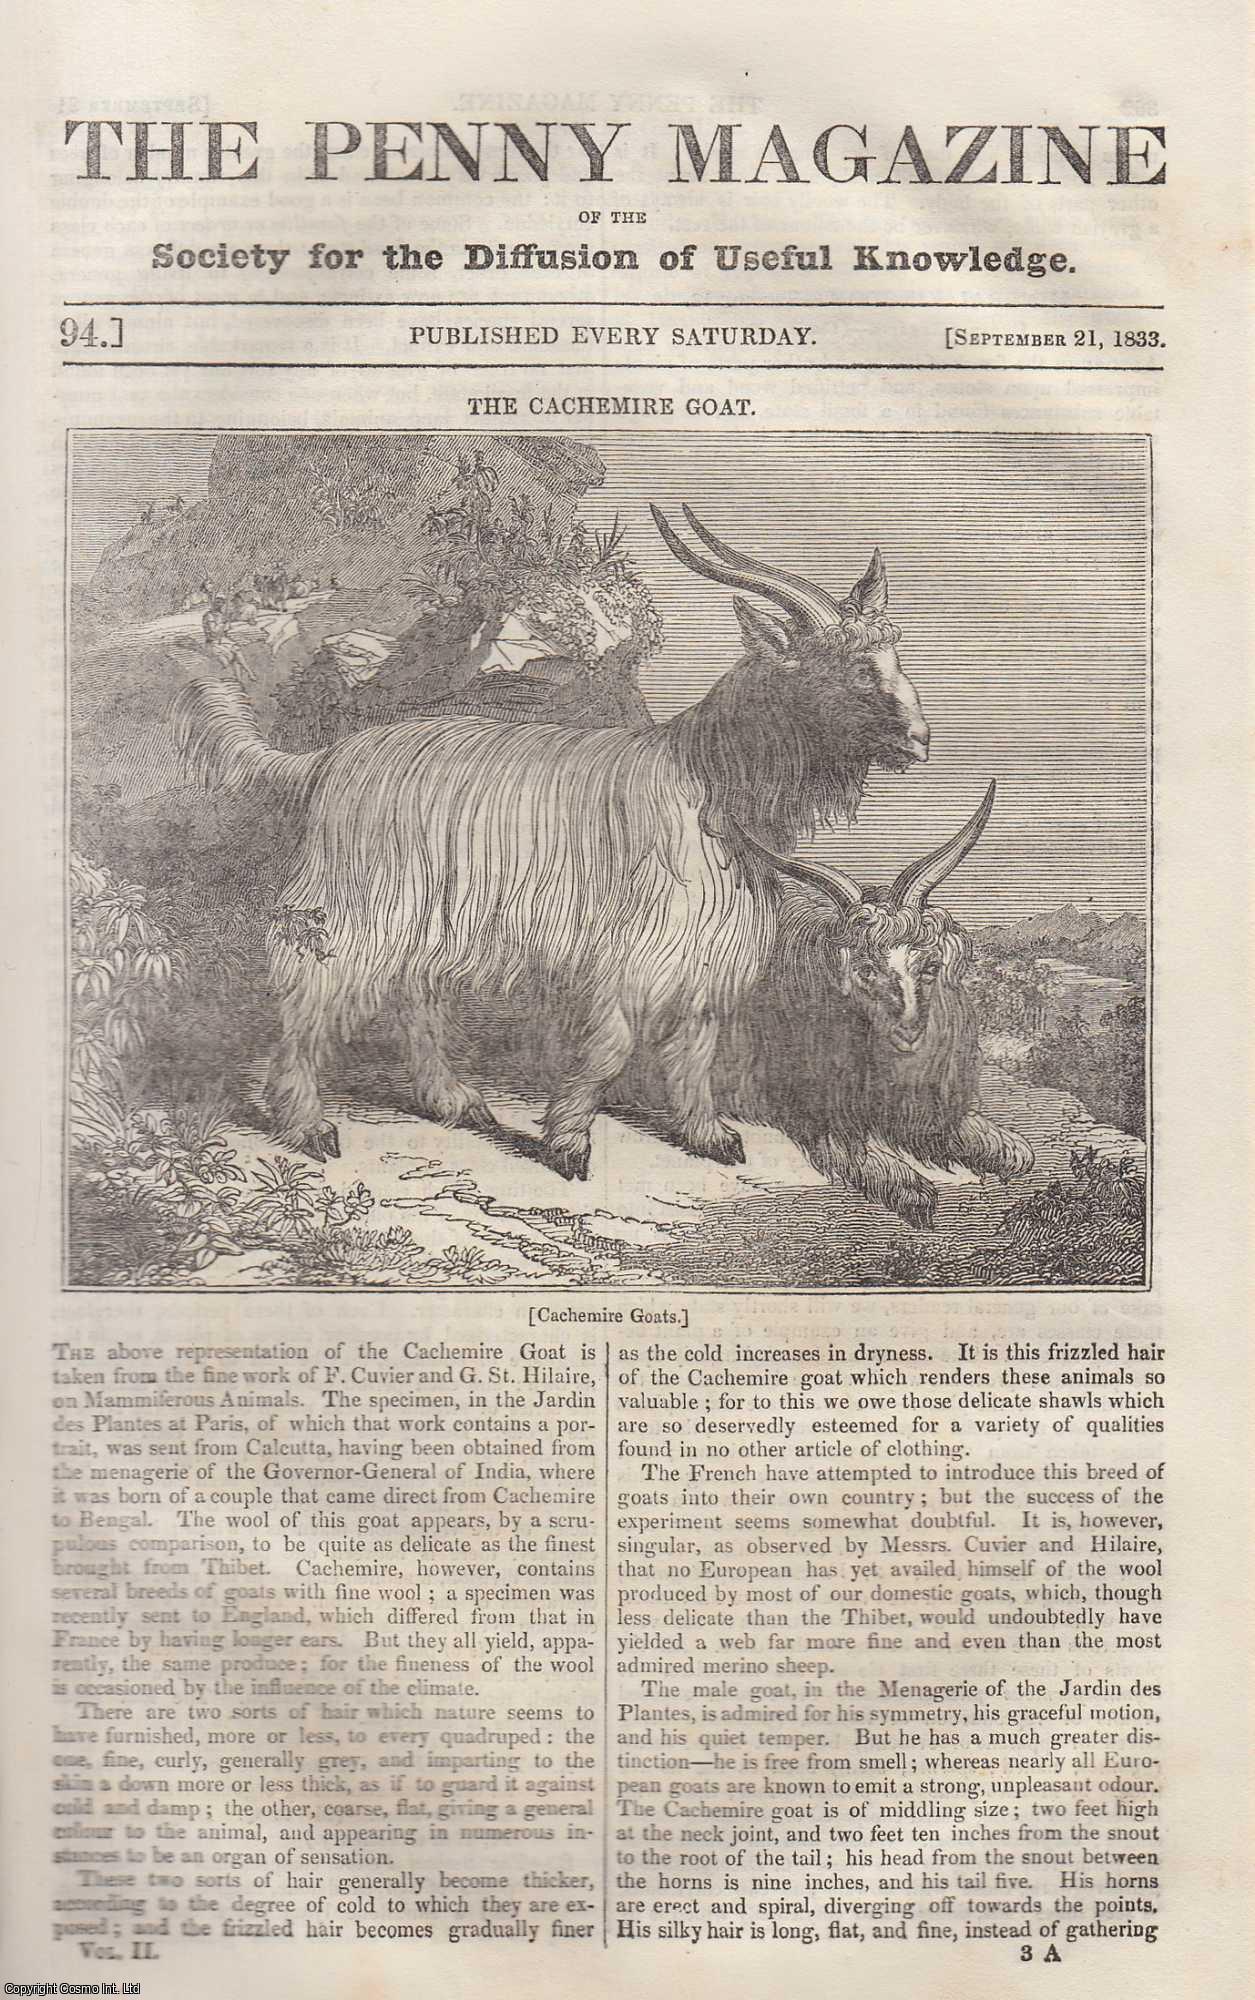 Penny Magazine - The Cachemire Goat (animal); The Natural Bridges of Icononzo; The City of Rochester, etc. Issue No. 94, September 21st, 1833. A complete original weekly issue of the Penny Magazine, 1833.